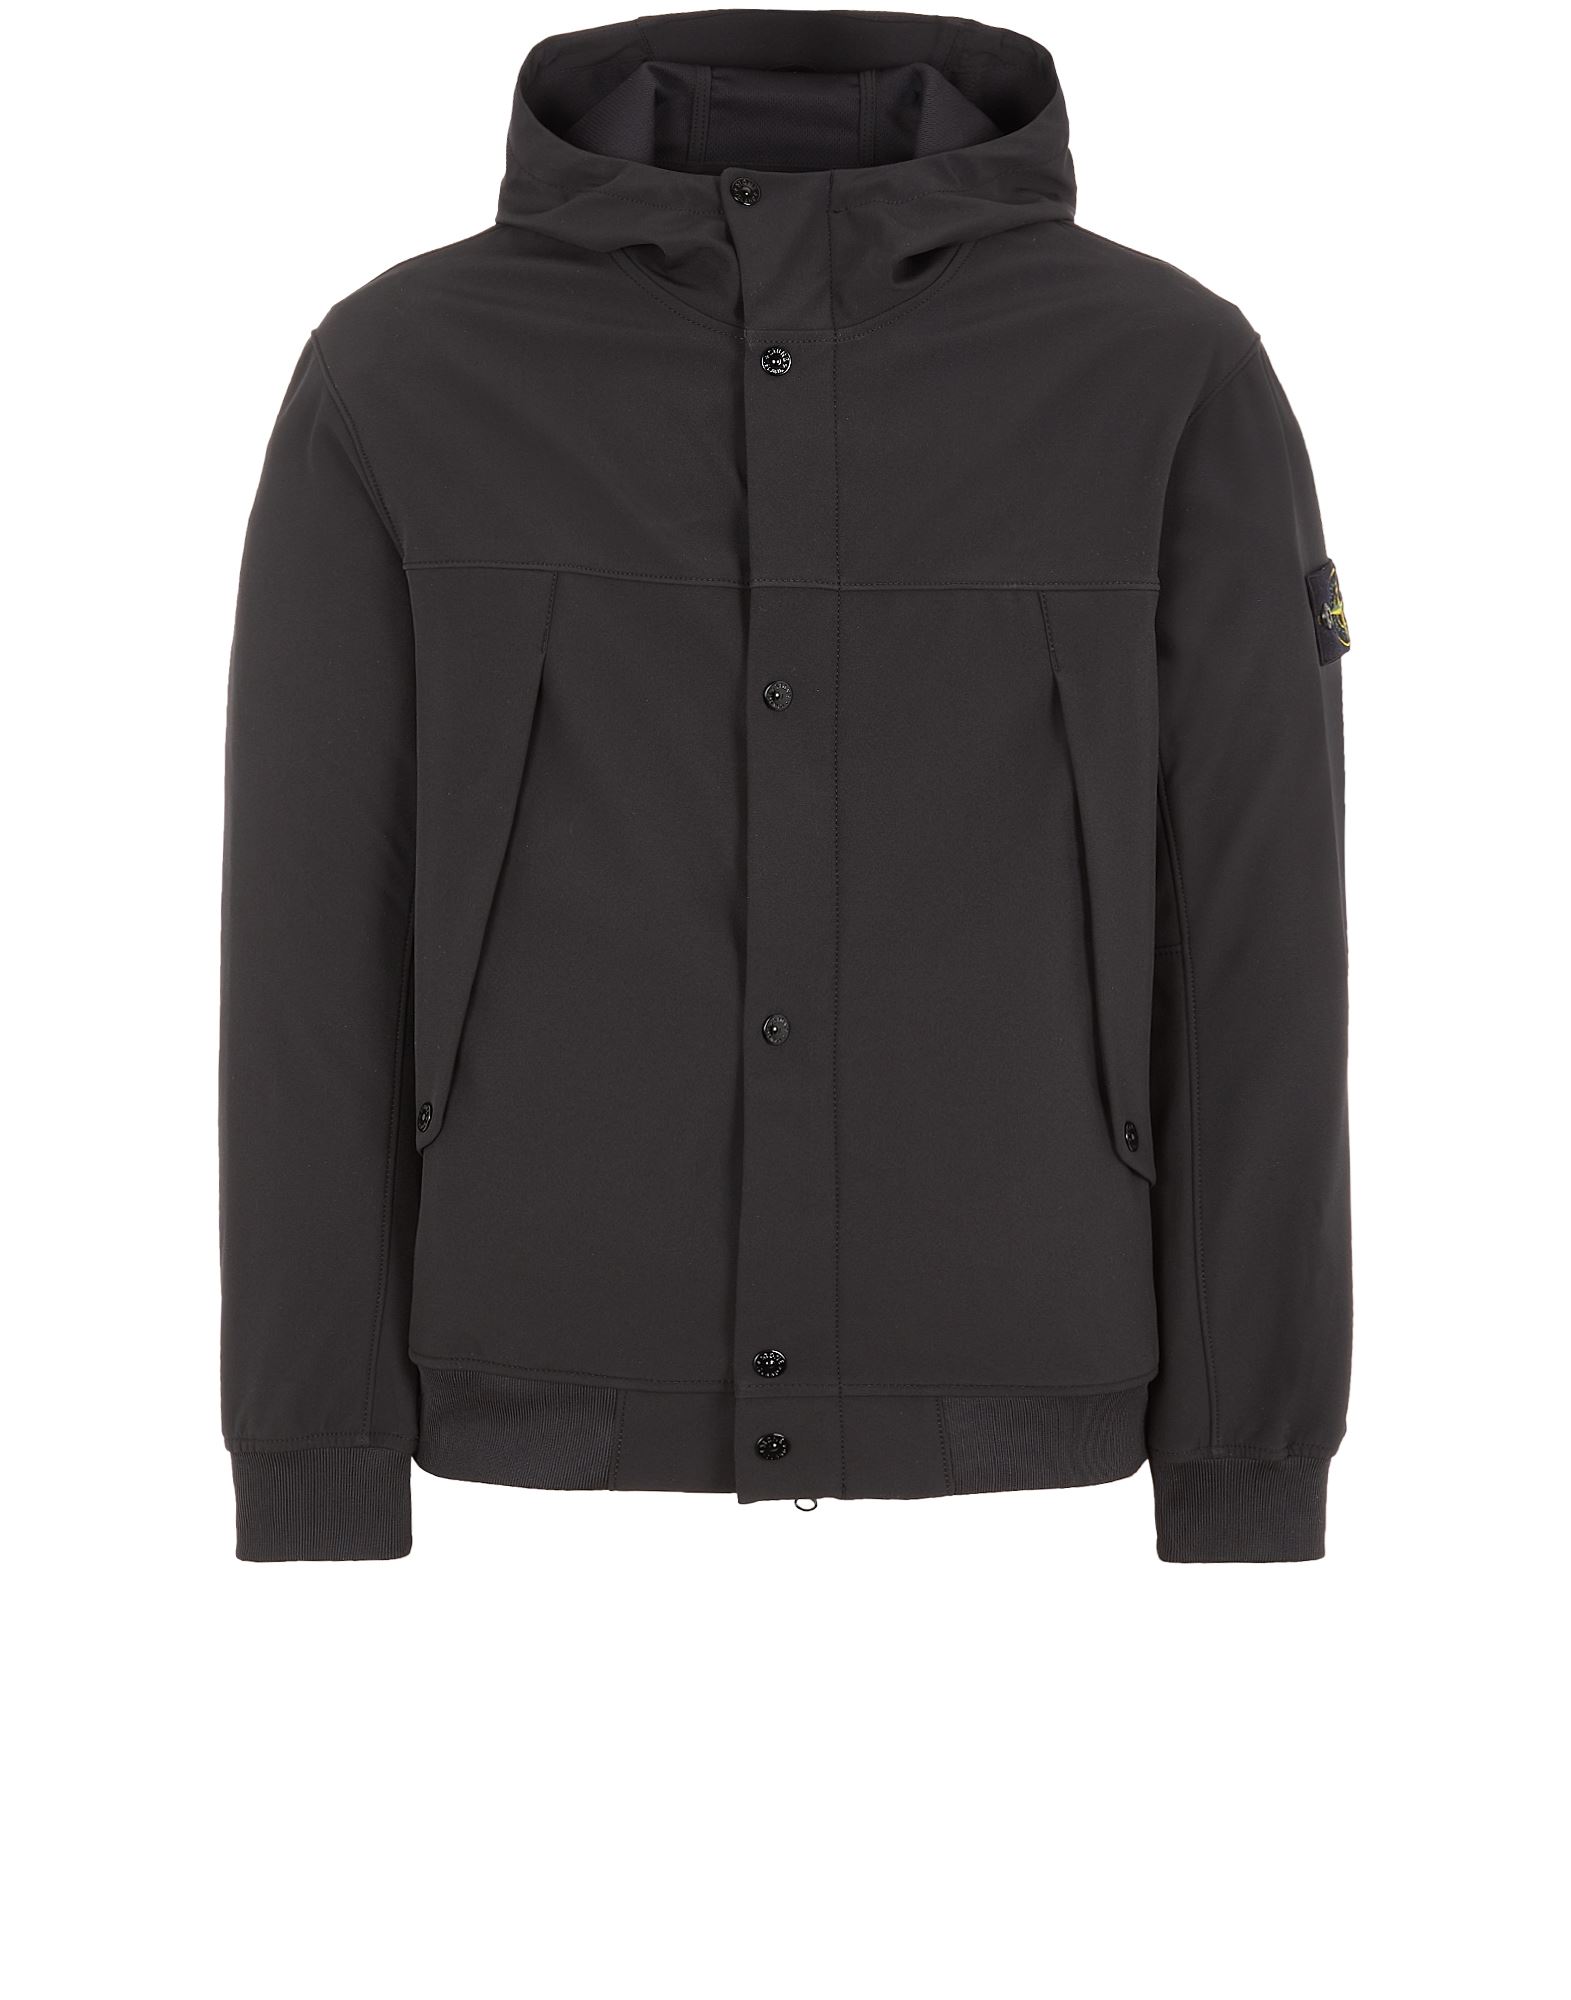 STONE ISLAND/ストーンアイランド/40227 LIGHT SOFT SHELL-R_E.DYE TECHNOLOGY IN  RECYCLED POLYESTER